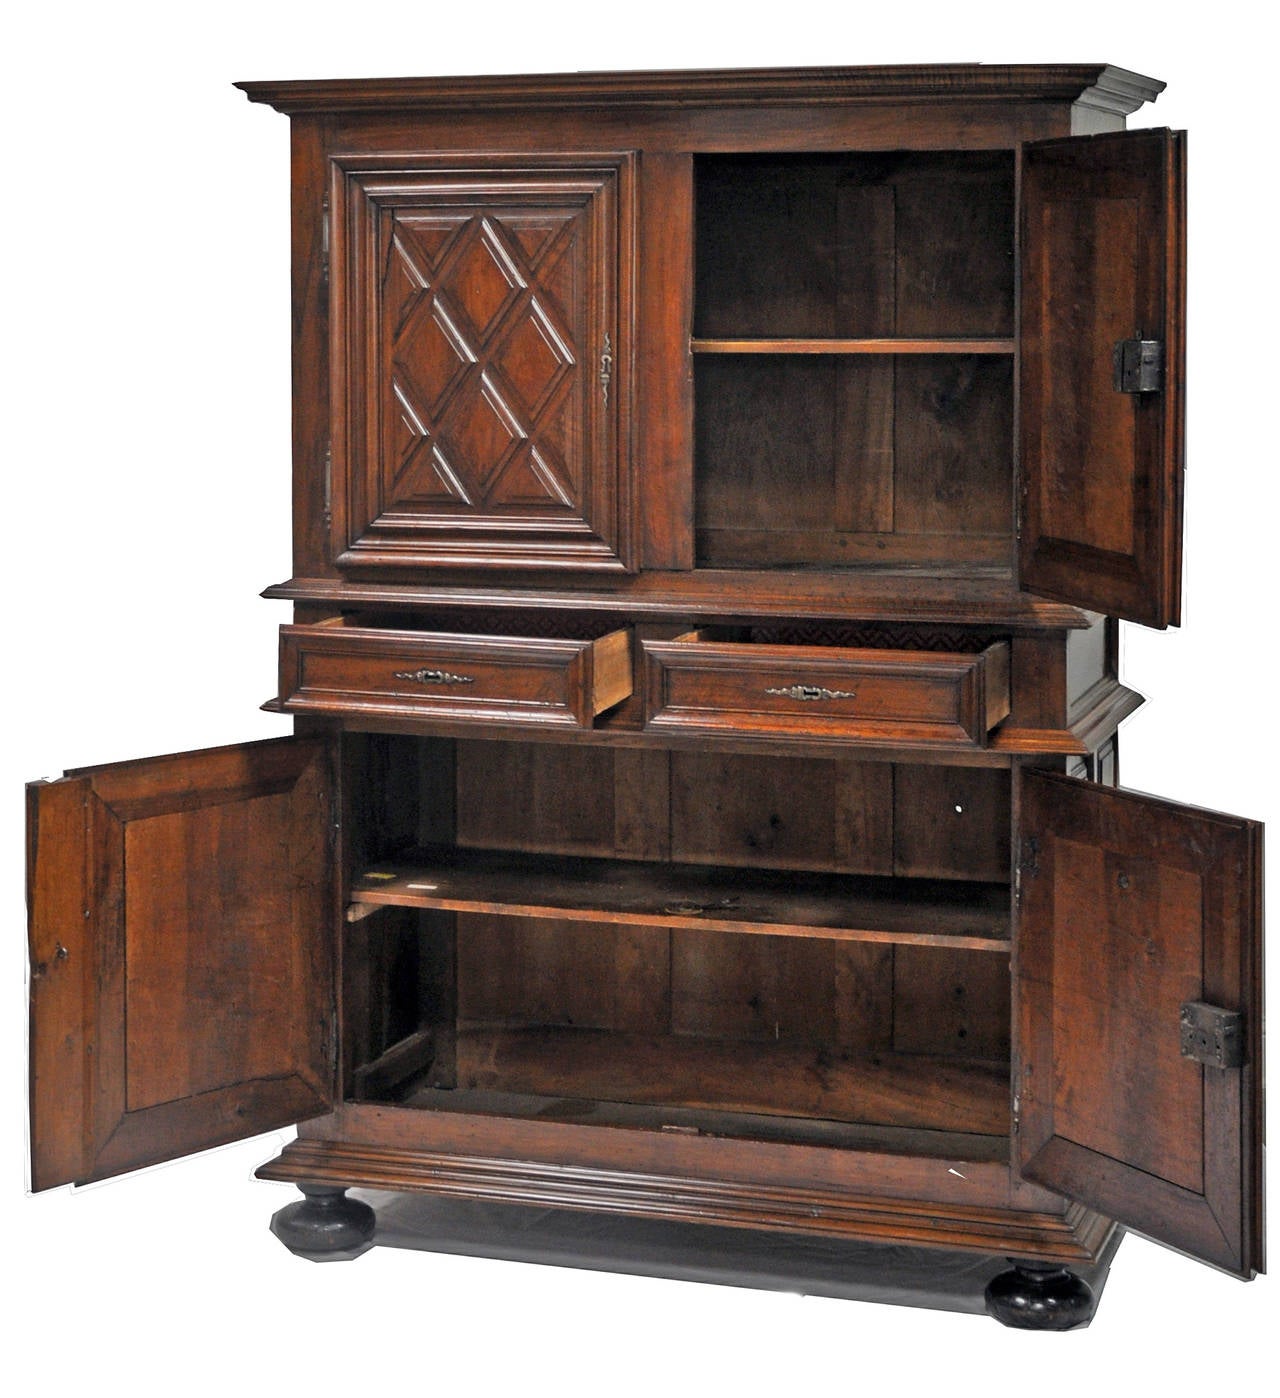 Beautiful cabinet with raised diamond motif on doors and bun feet. 

Established in 1979, Joyce Horn Antiques, ltd. continues its 36 year tradition of being a family owned and operated business specializing in hand procured, Fine European antique